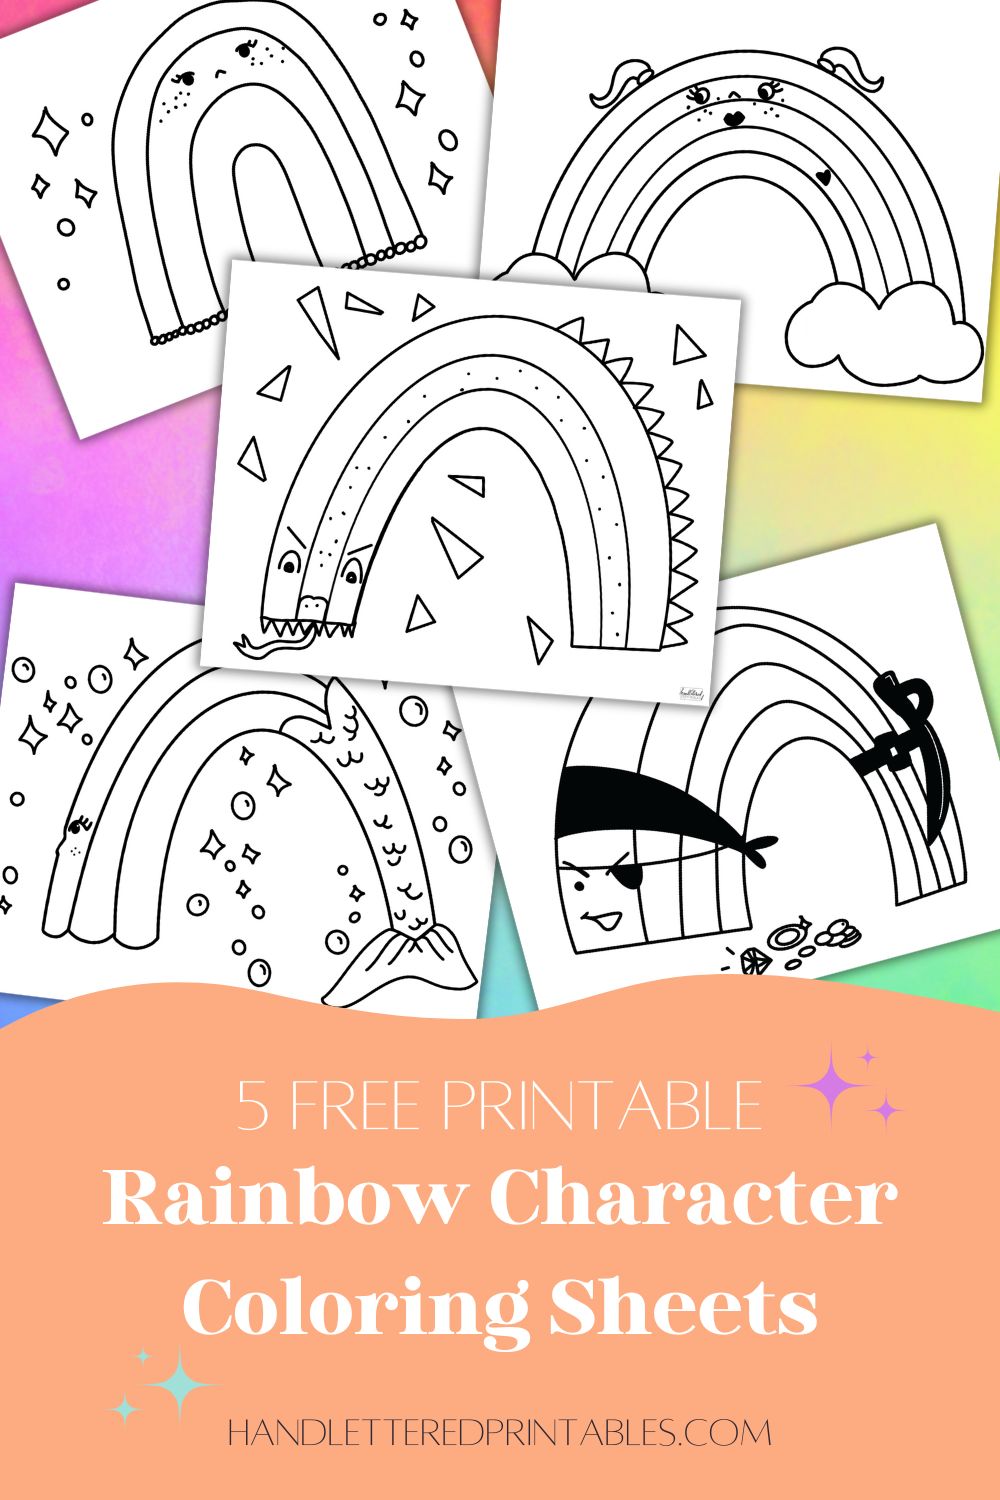 Text reads: 5 free printable rainbow characters coloring sheets image shows all 5 coloring sheets overlayed on a rainbow background. characters include basic rainbow with face, girl with pigtails rainnbow, dragon rainbow, pirate rainbow and mermaid rainbow